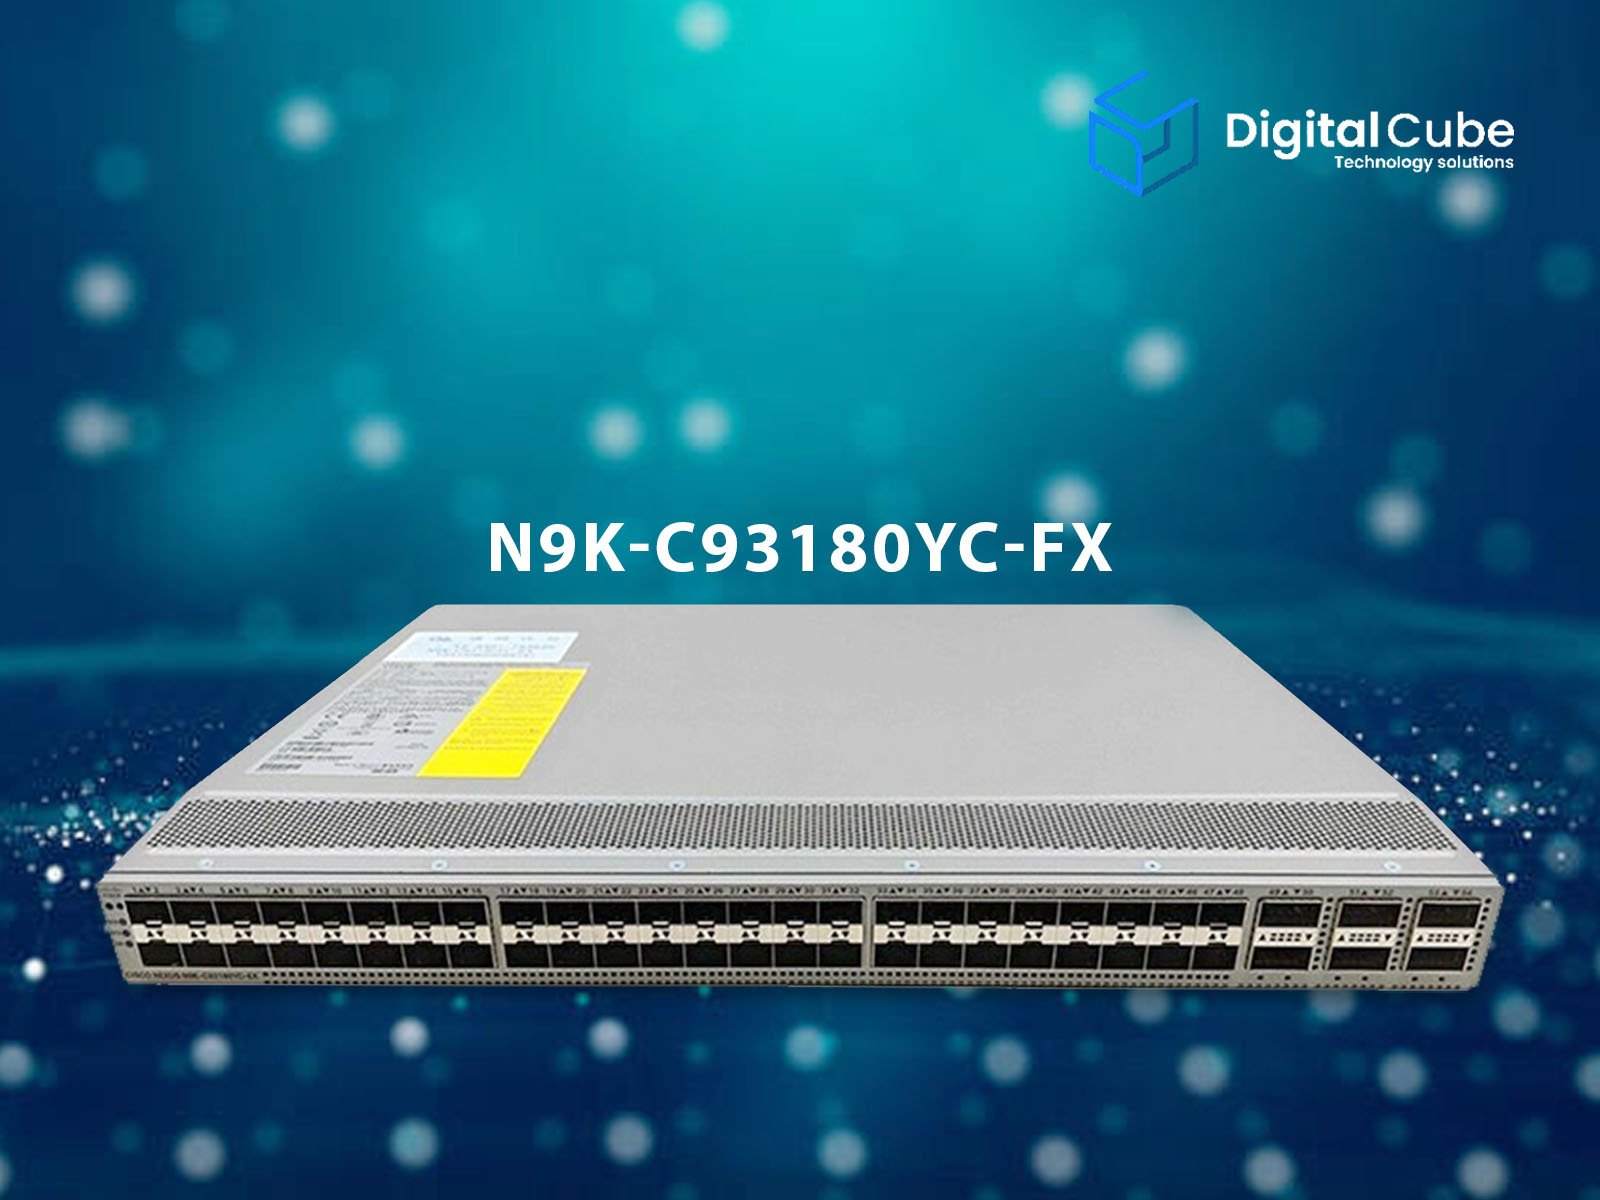 Making Connectivity Better with N9K-C93180YC-FX